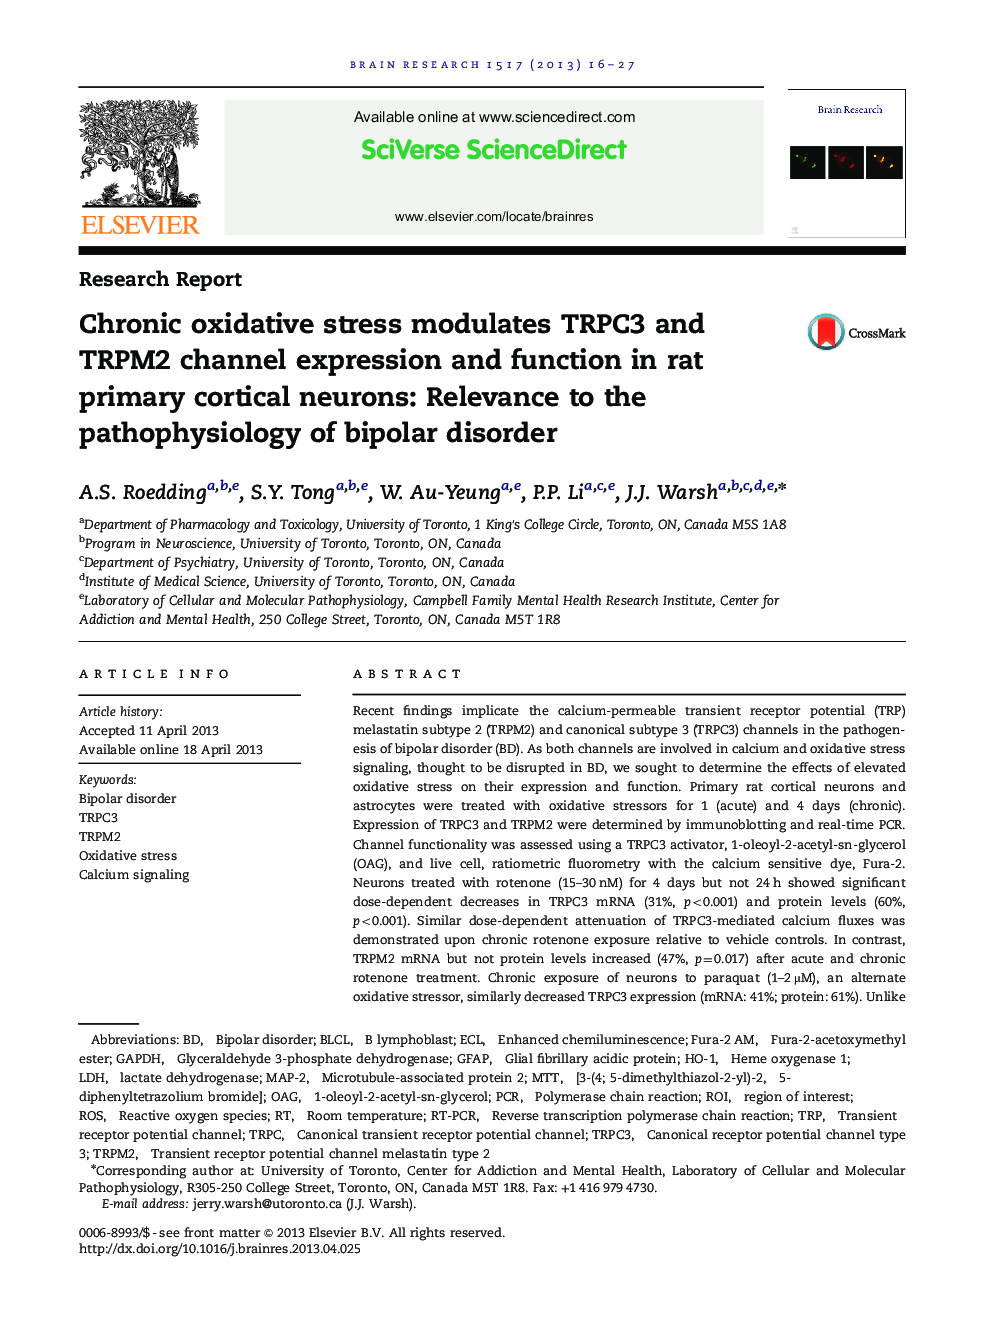 Research ReportChronic oxidative stress modulates TRPC3 and TRPM2 channel expression and function in rat primary cortical neurons: Relevance to the pathophysiology of bipolar disorder